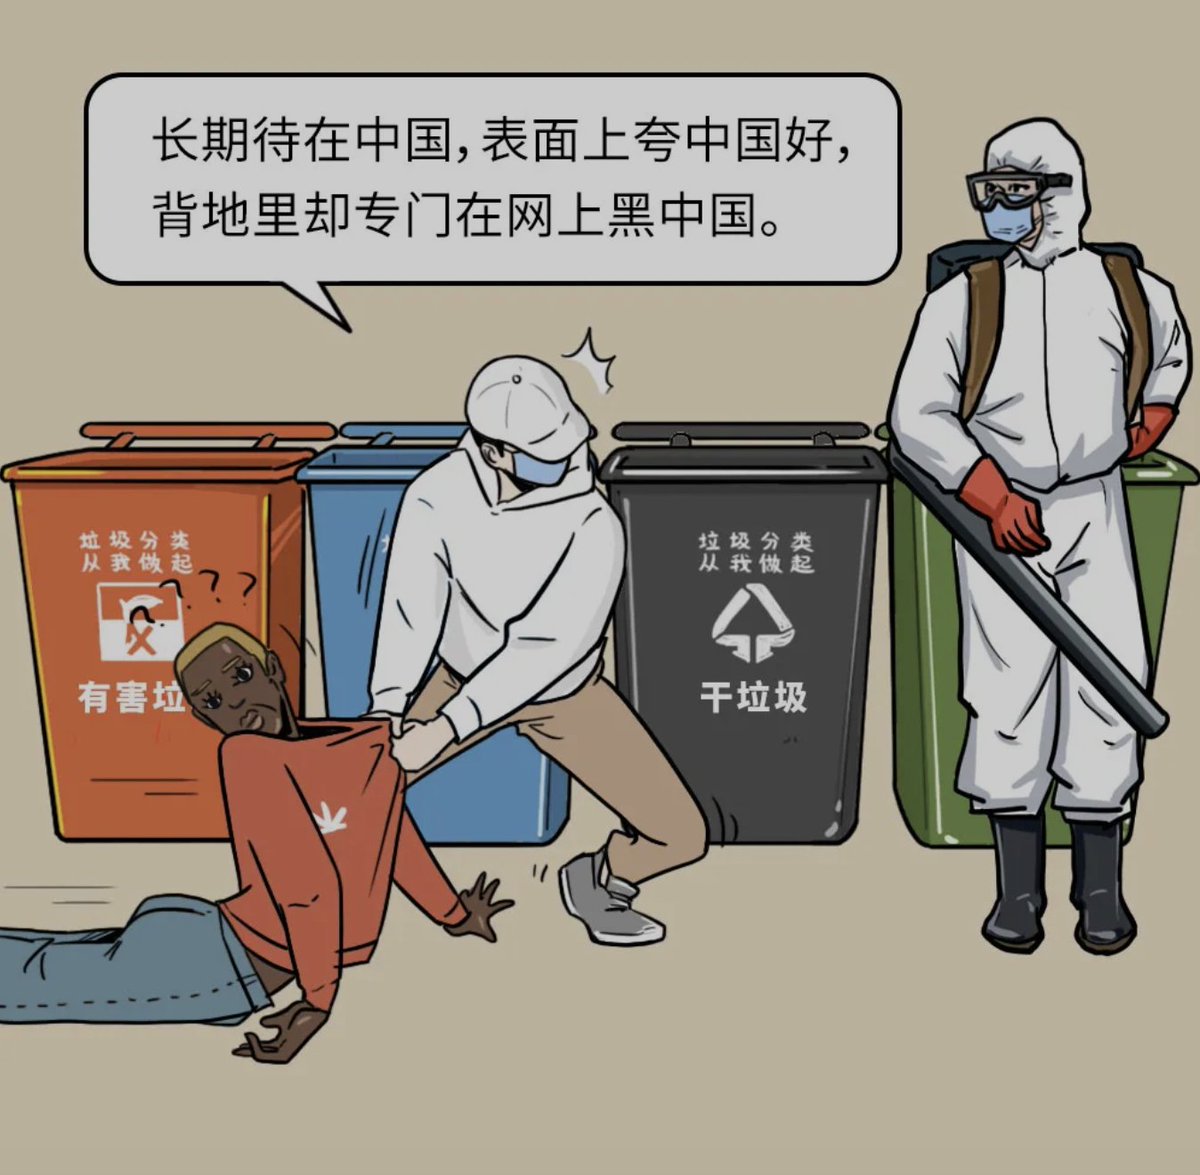 Political cartoons going viral on Weibo calling Africans/black people "foreign trash" throwing them into dumpsters. The gov is going around testing foreigners (BUT ONLY AFRICAN foreigners)  But Who knows what they're doing to these ppl? They could be Infecting them with it.